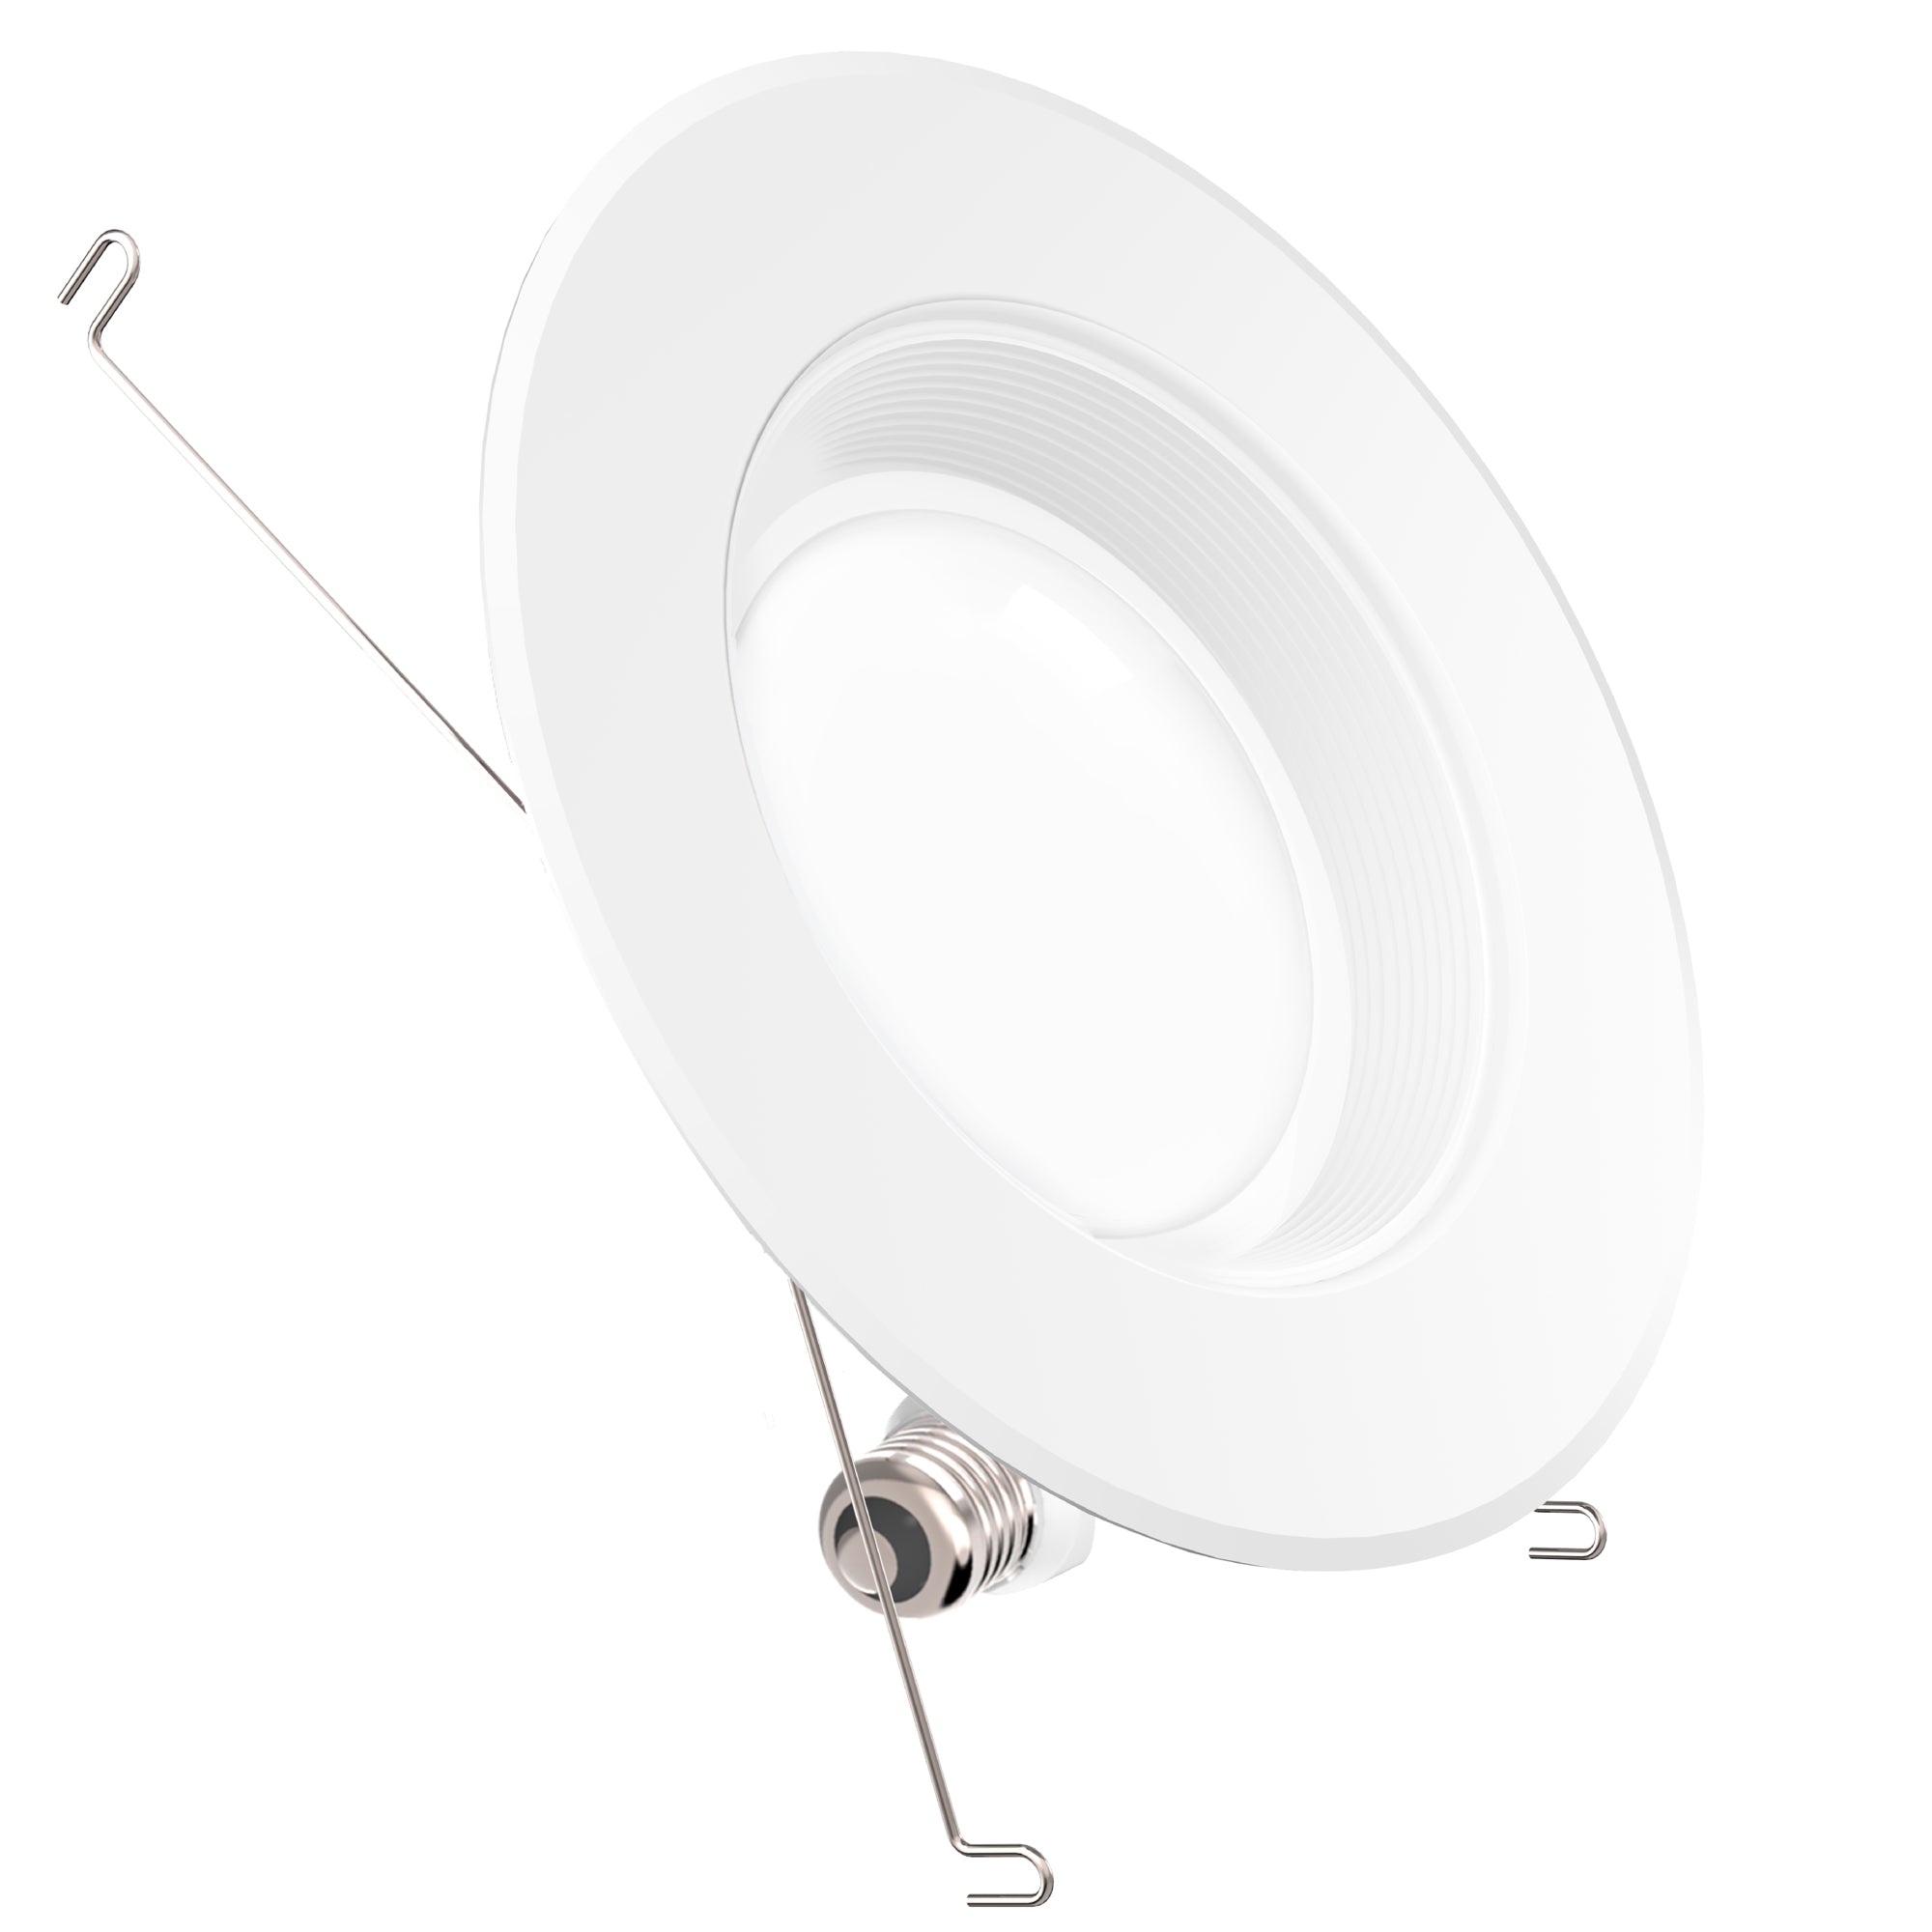 The 5- or 6-inch LED retrofit downlight from Sunco Lighting includes baffle trim, an E26 adapter, TP24 connector, adjustable mounting clips, and a long lifetime LED with 35,000 lifetime hours. This 13W LED is a 75W equivalent. That means you save energy when you switch to this LED from more traditional light bulbs. This bright LED provides 1050 lumens in a 90-degree beam angle. 